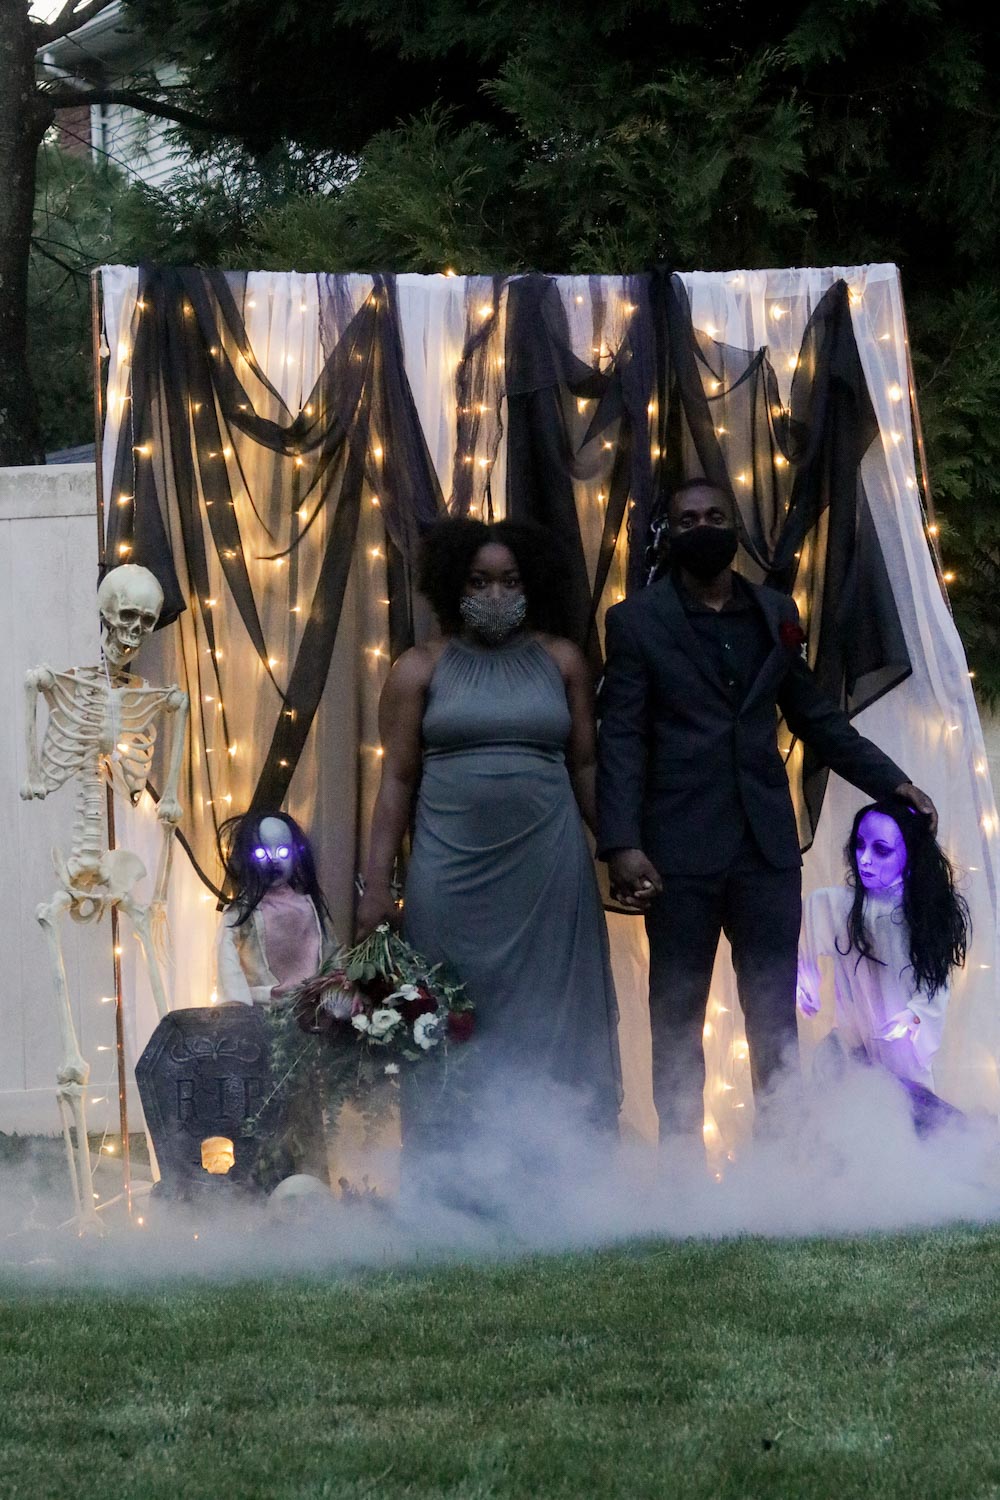 A man and woman standing in front of a DIY photo booth decorated with fog, lighting, and glowing zombie sisters.